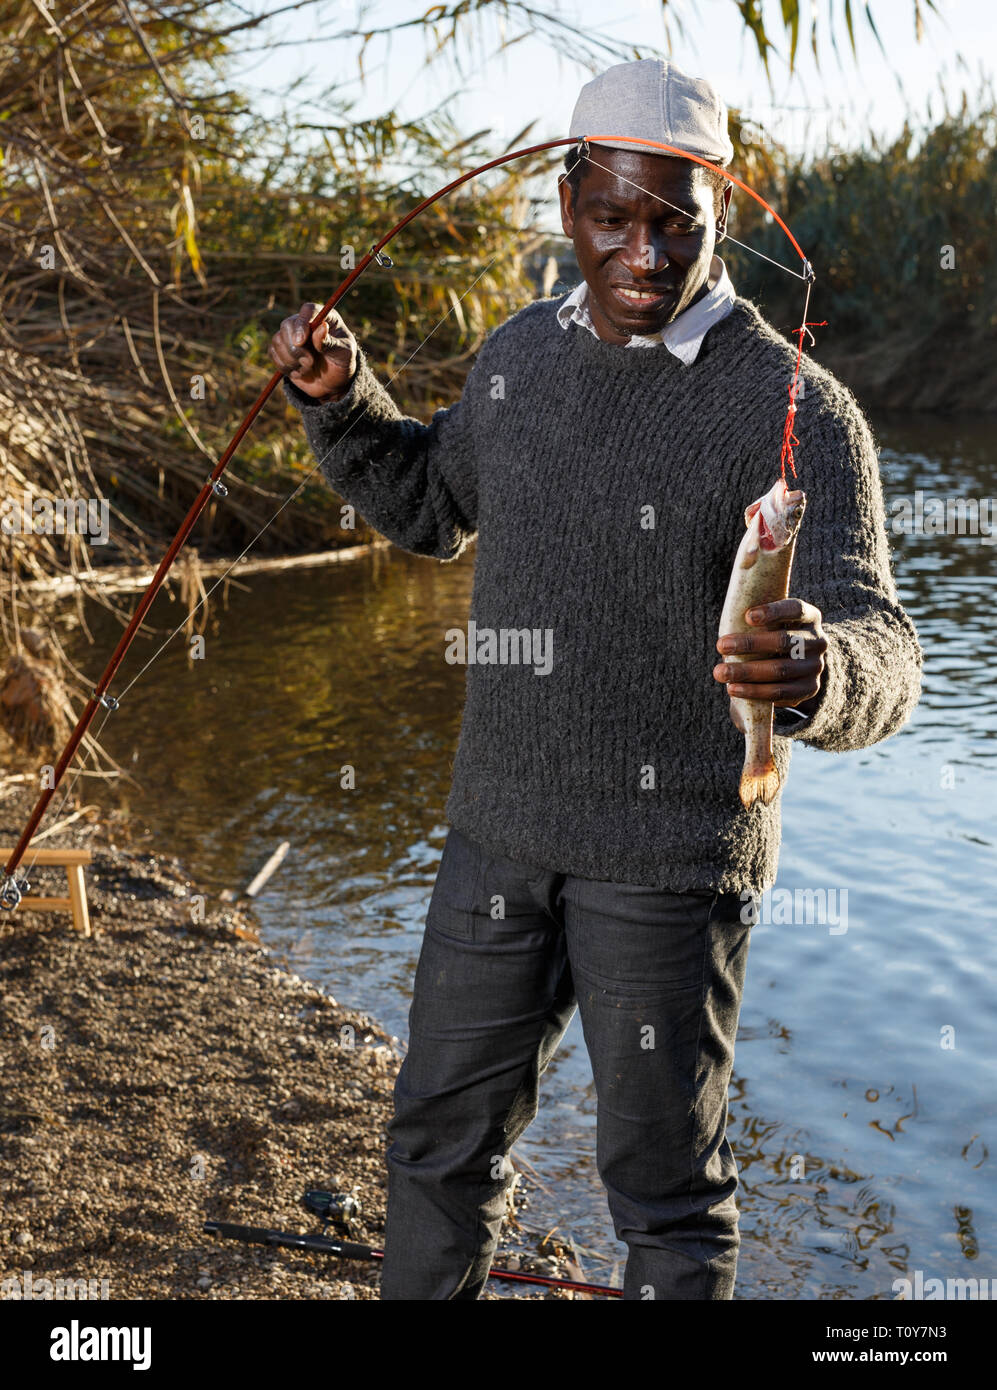 Portrait of enthusiastic African man holding fishing rod with fish on hook Stock Photo